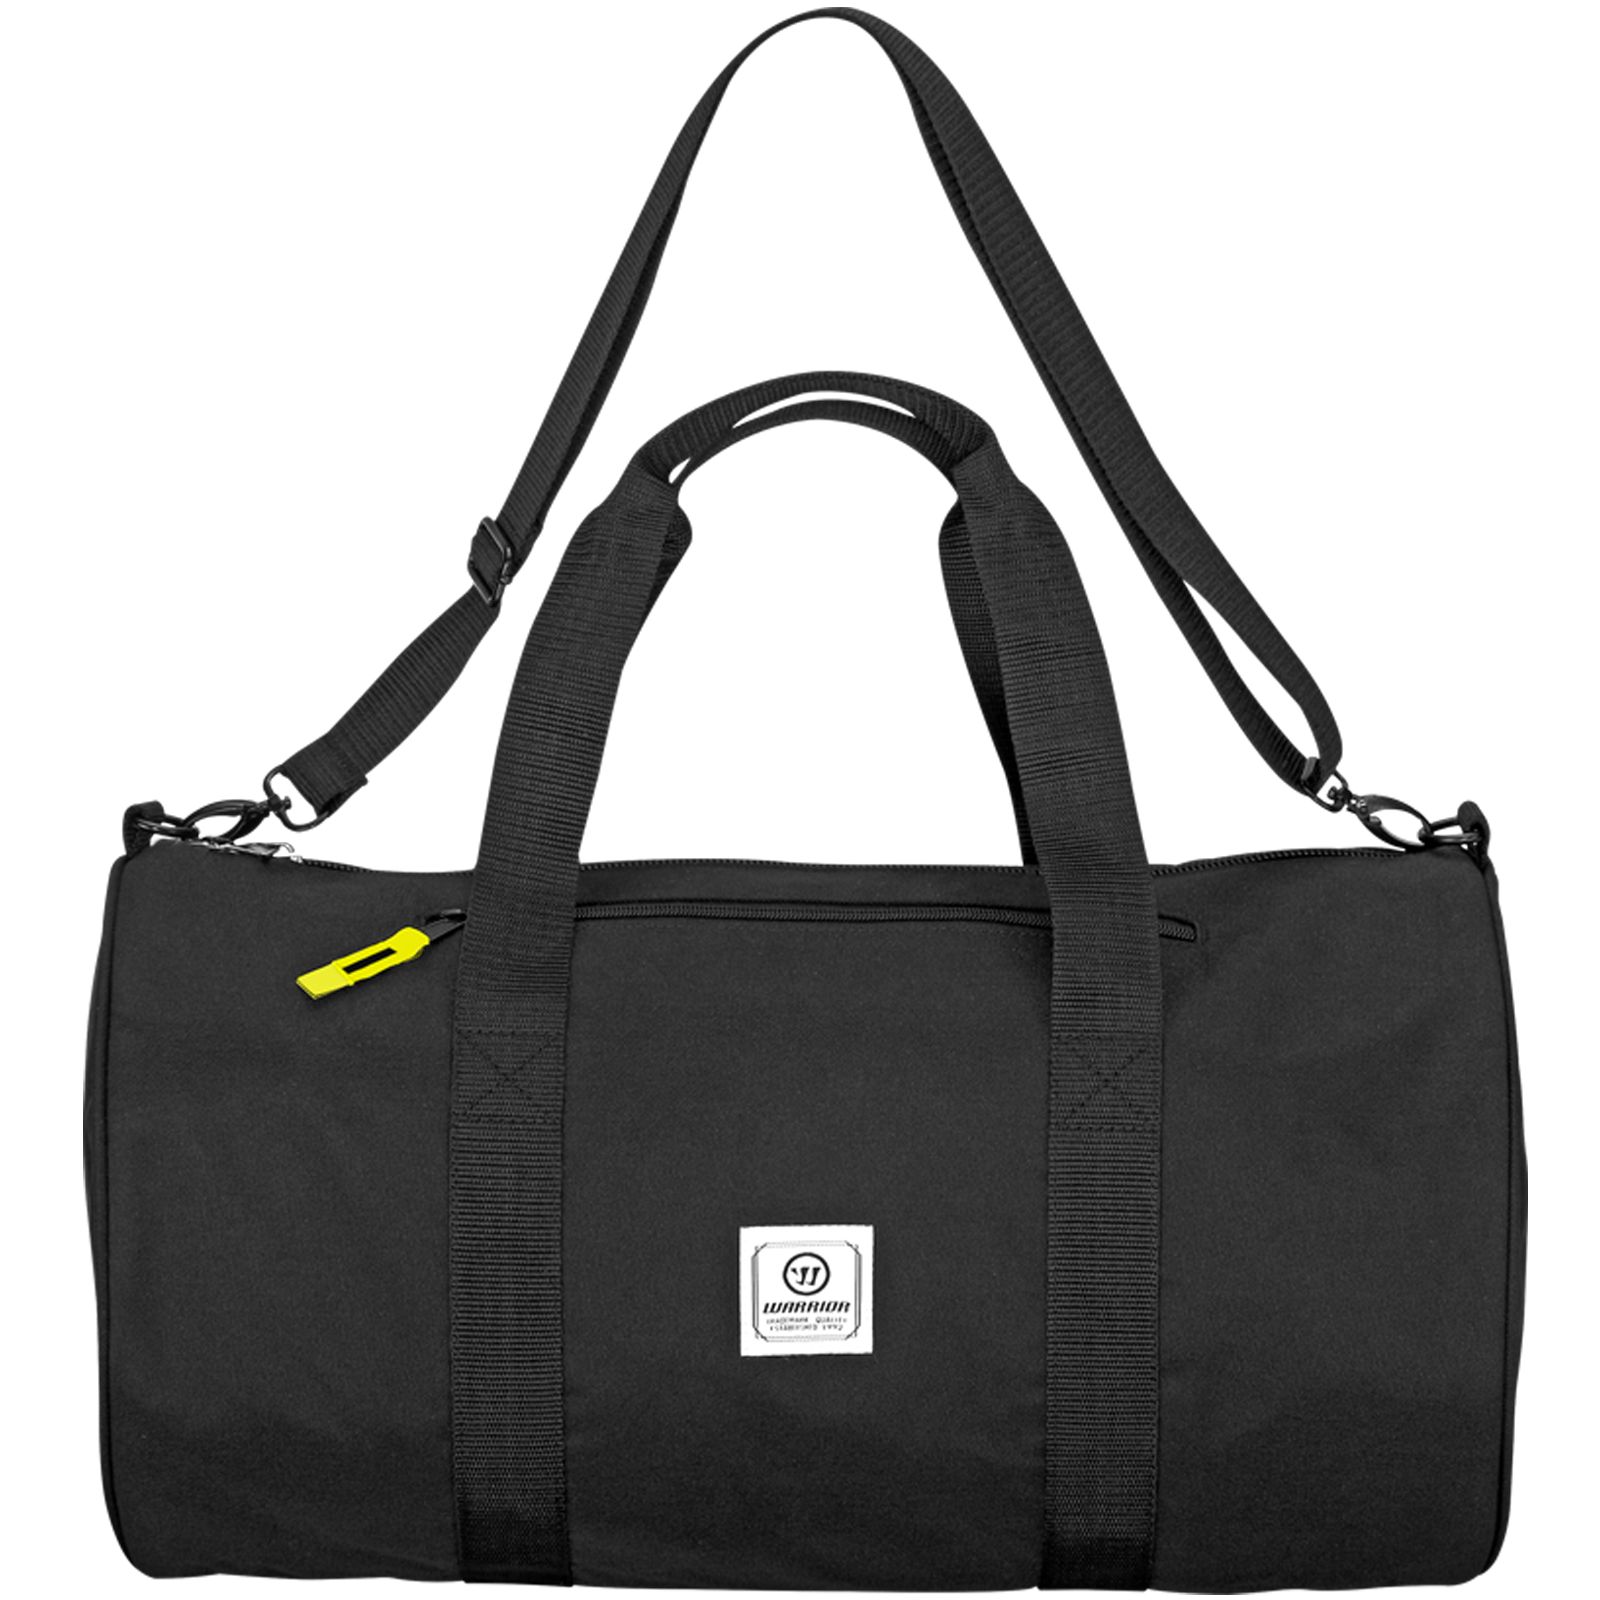 Q10 Day Duffle Bag, Black with Grey image number 0